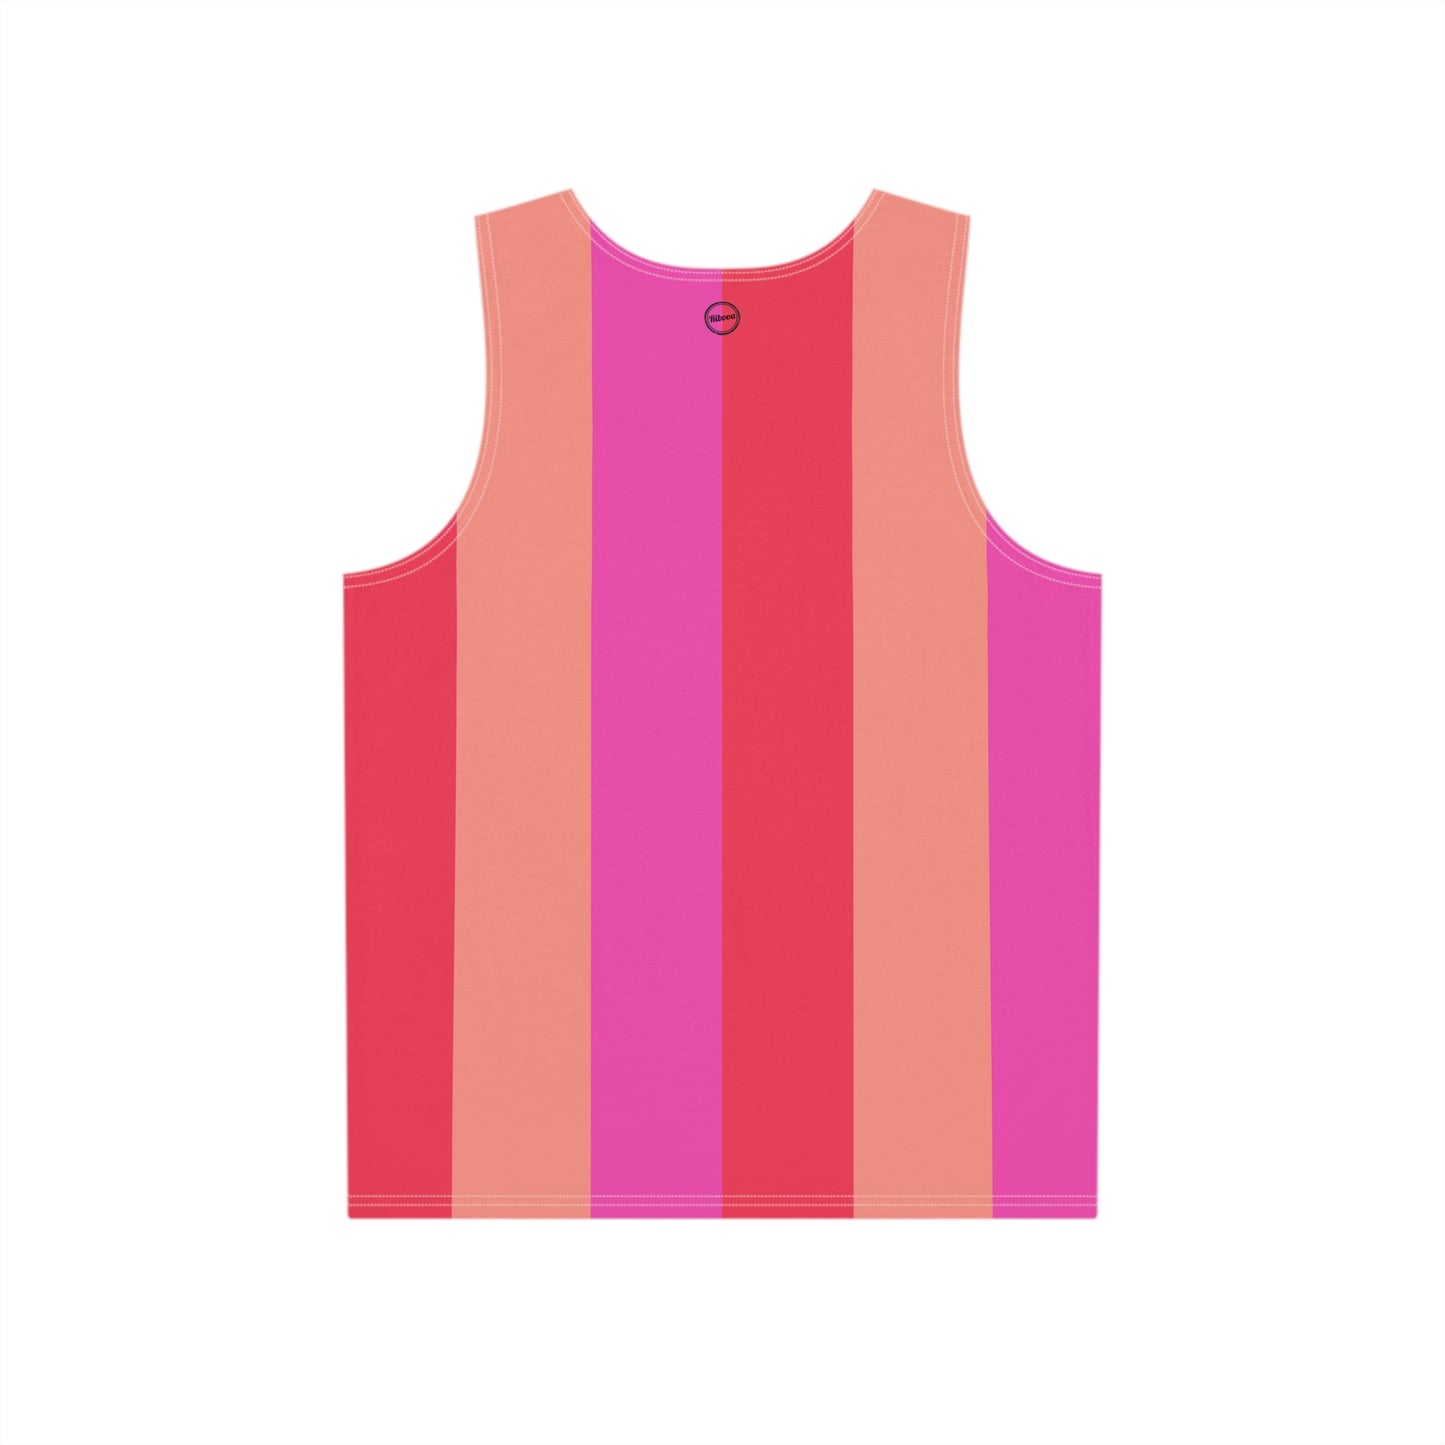 Rise Up! Tank Top for Men - Ribooa